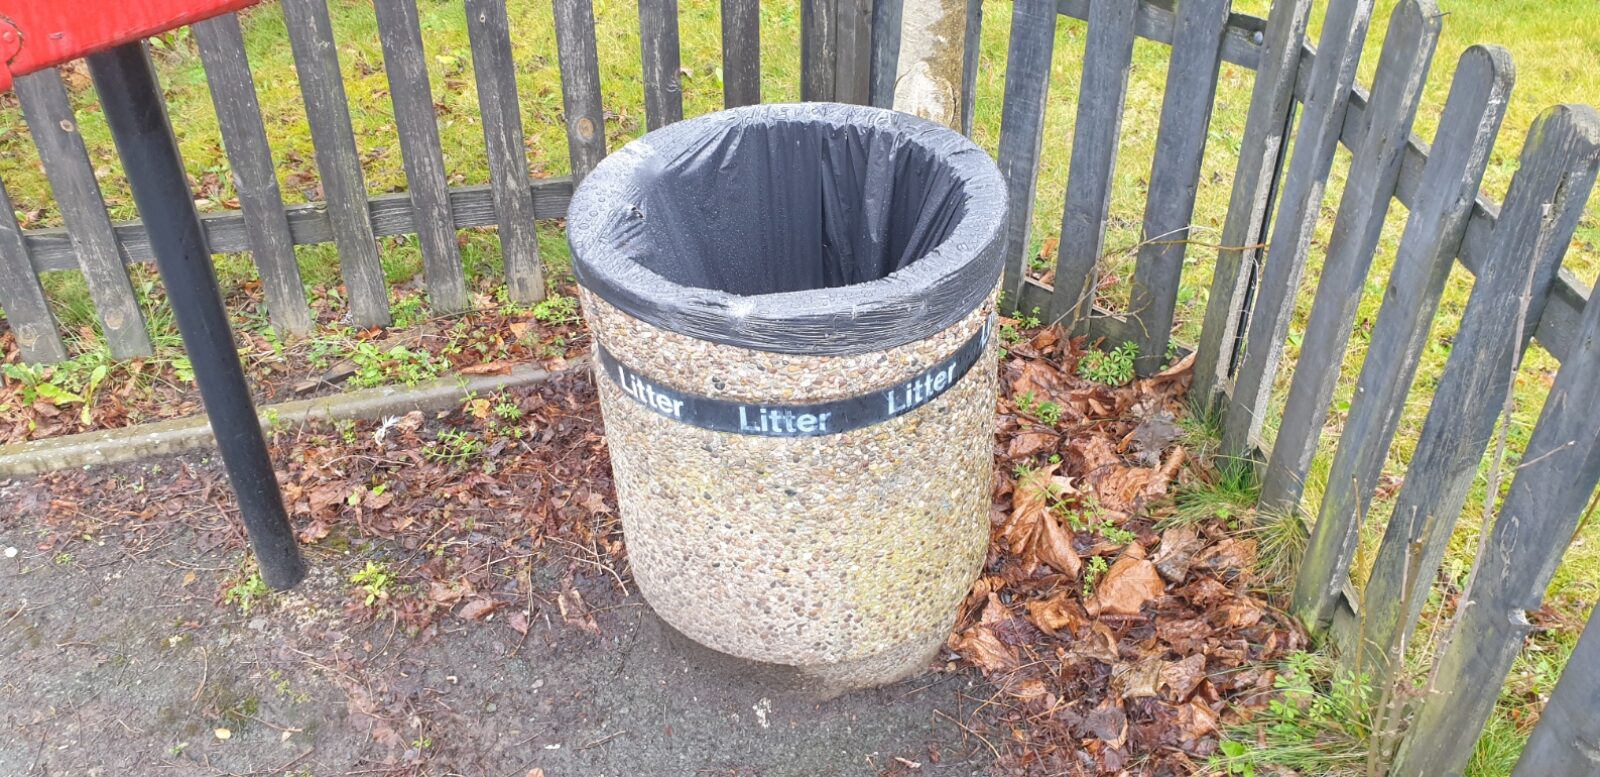 Our current bins are not fit for purpose. We need a more modern, up-to-date collection system.